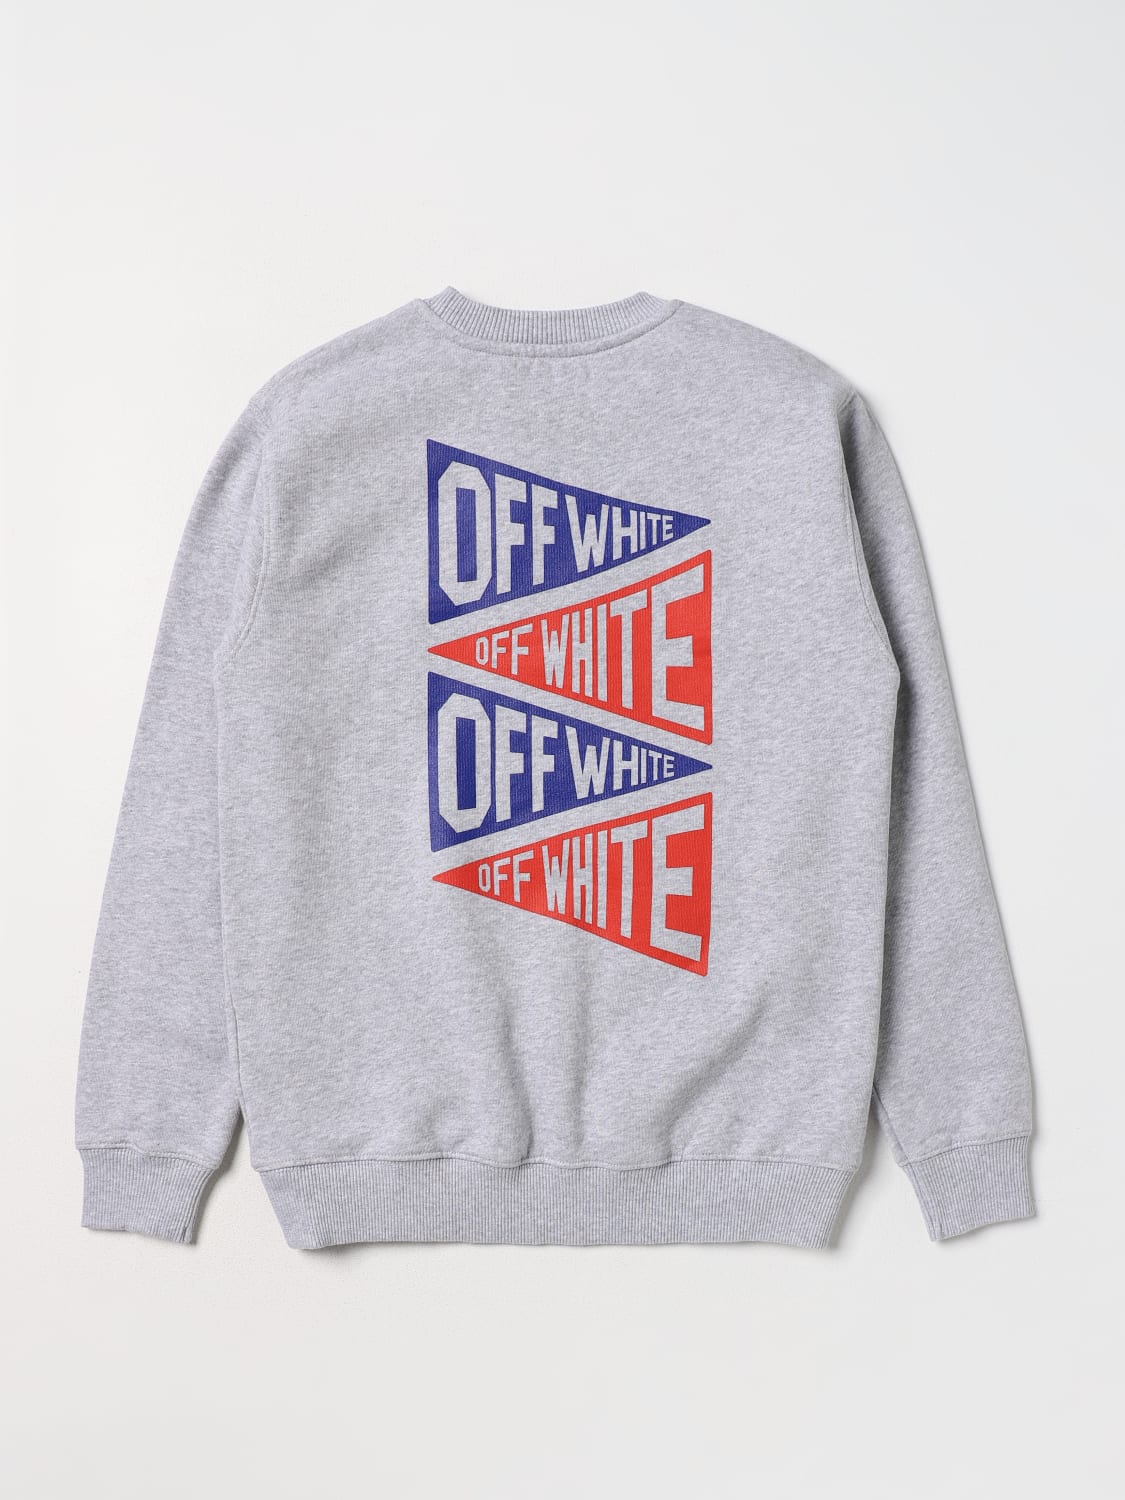 OFF-WHITE: sweater for boys - Black  Off-White sweater OBBB001C99FLE001  online at